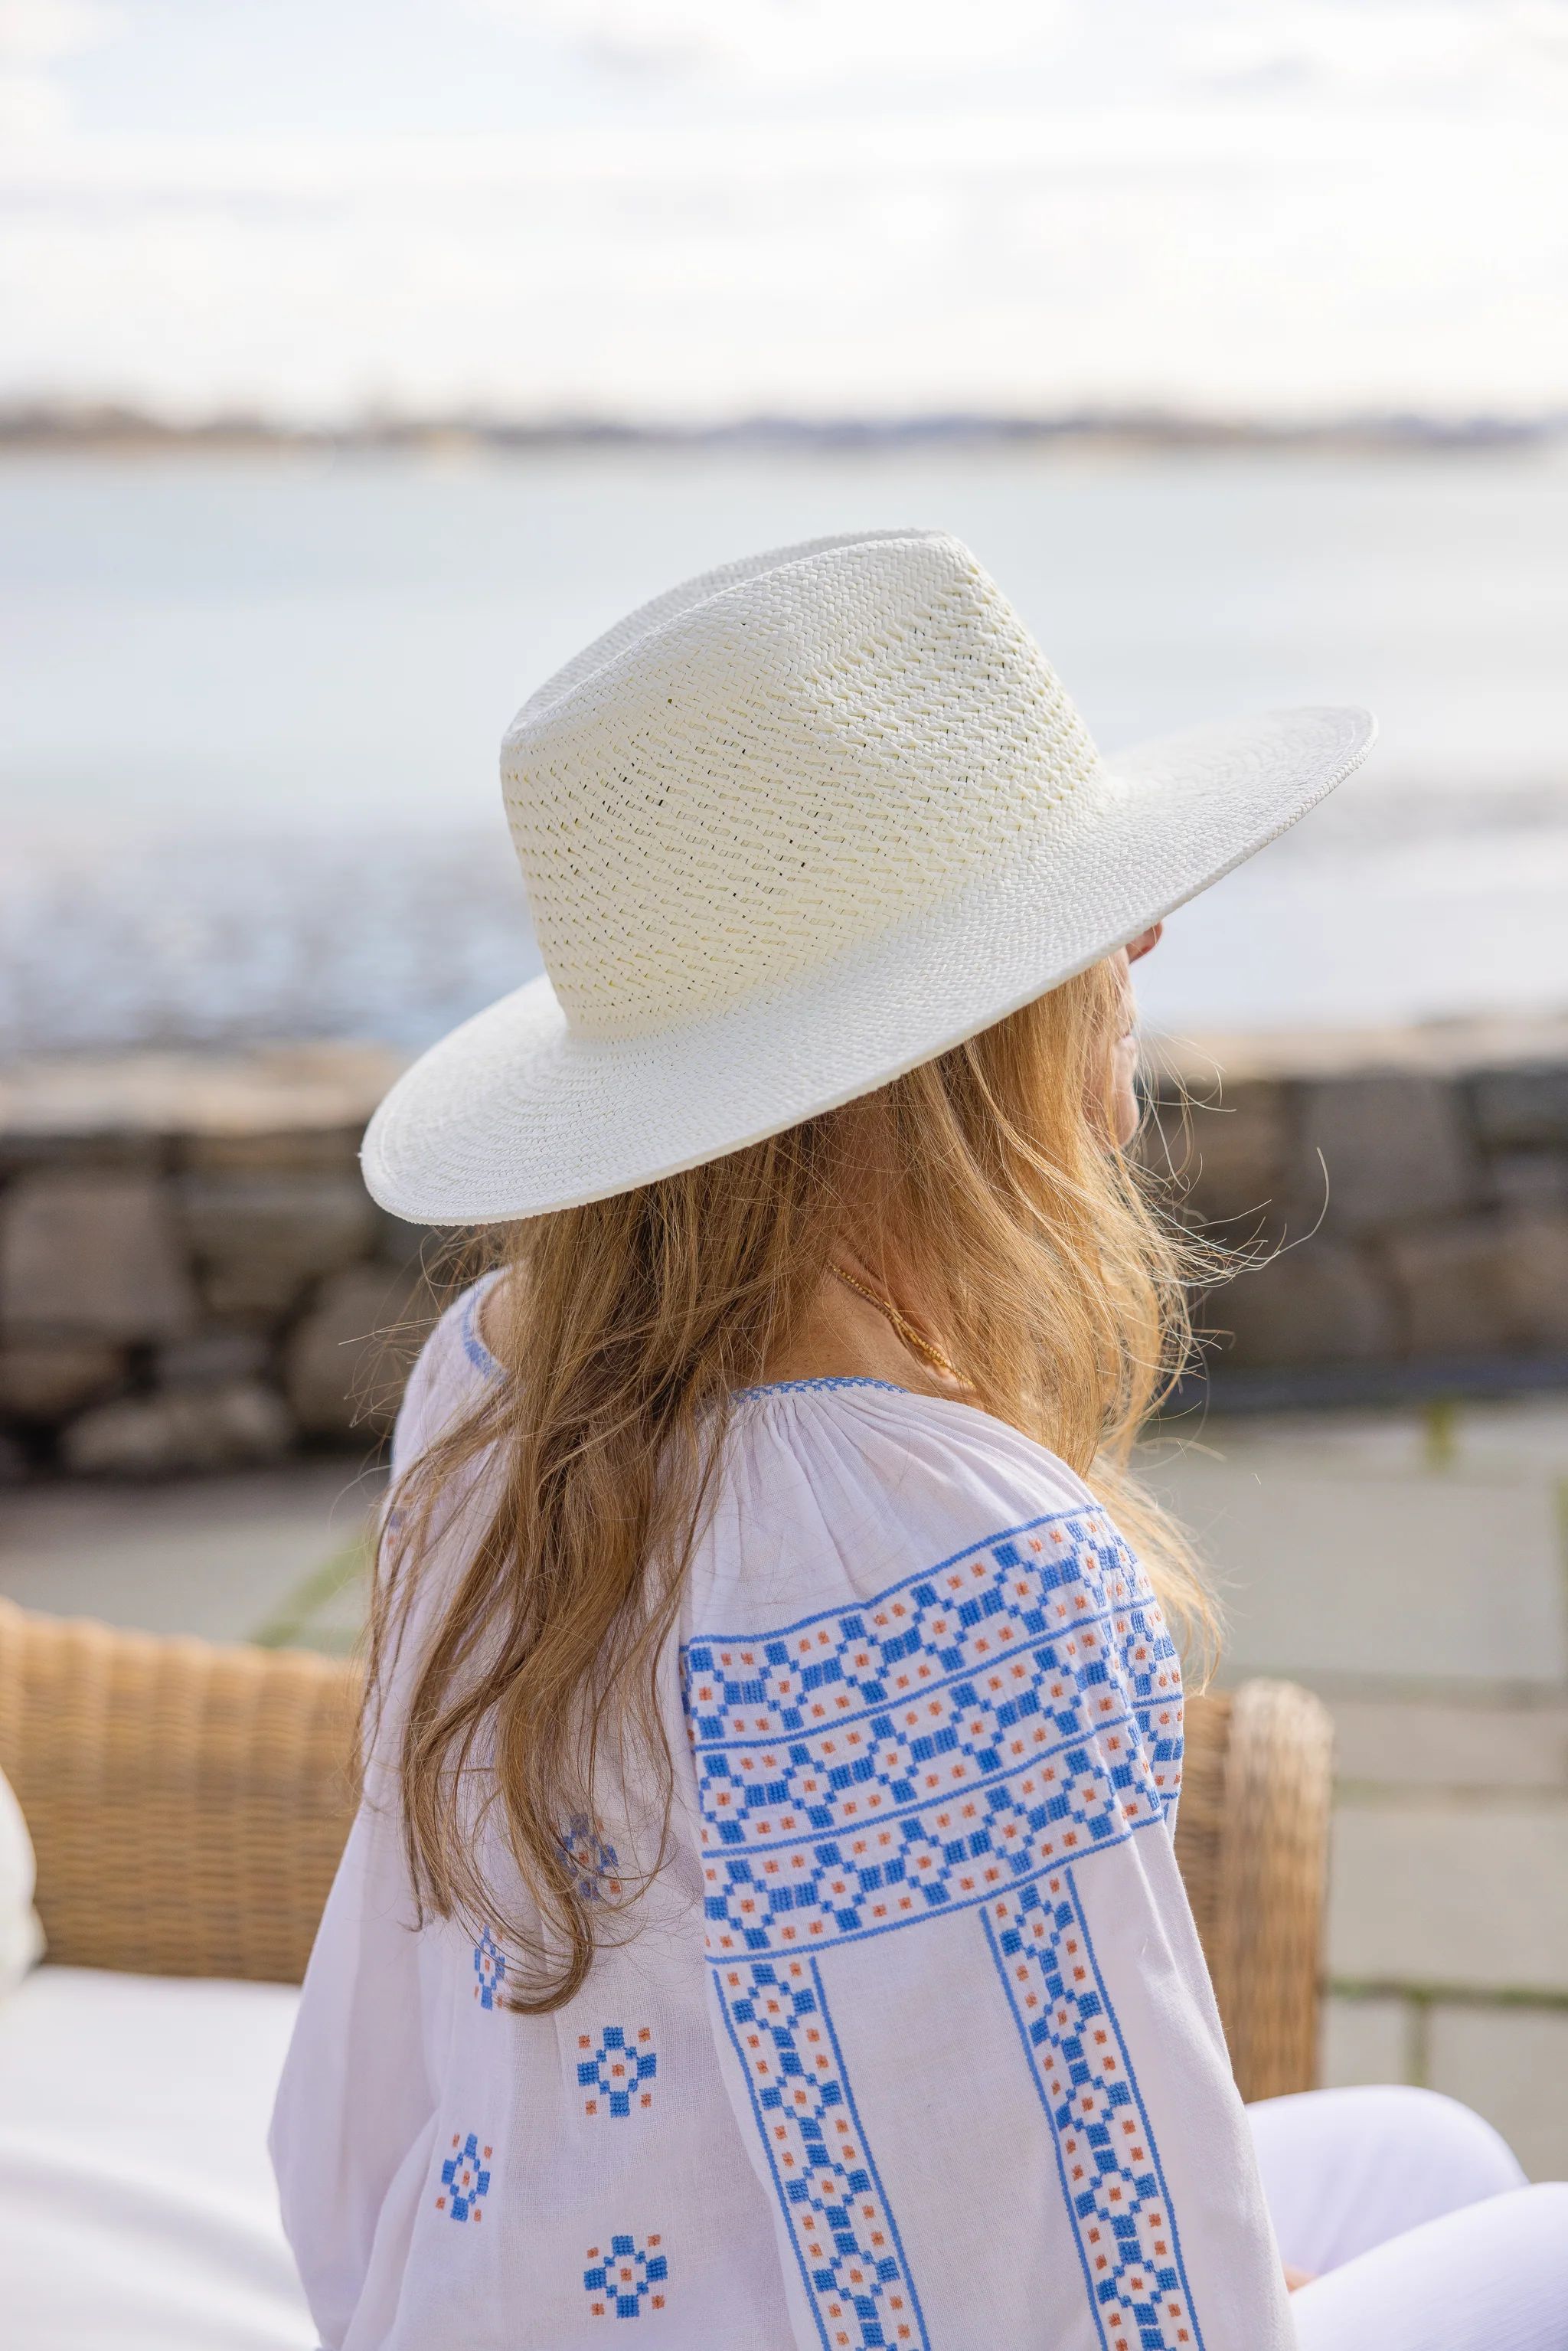 Vented Luxe Packable- Natural | Hat Attack